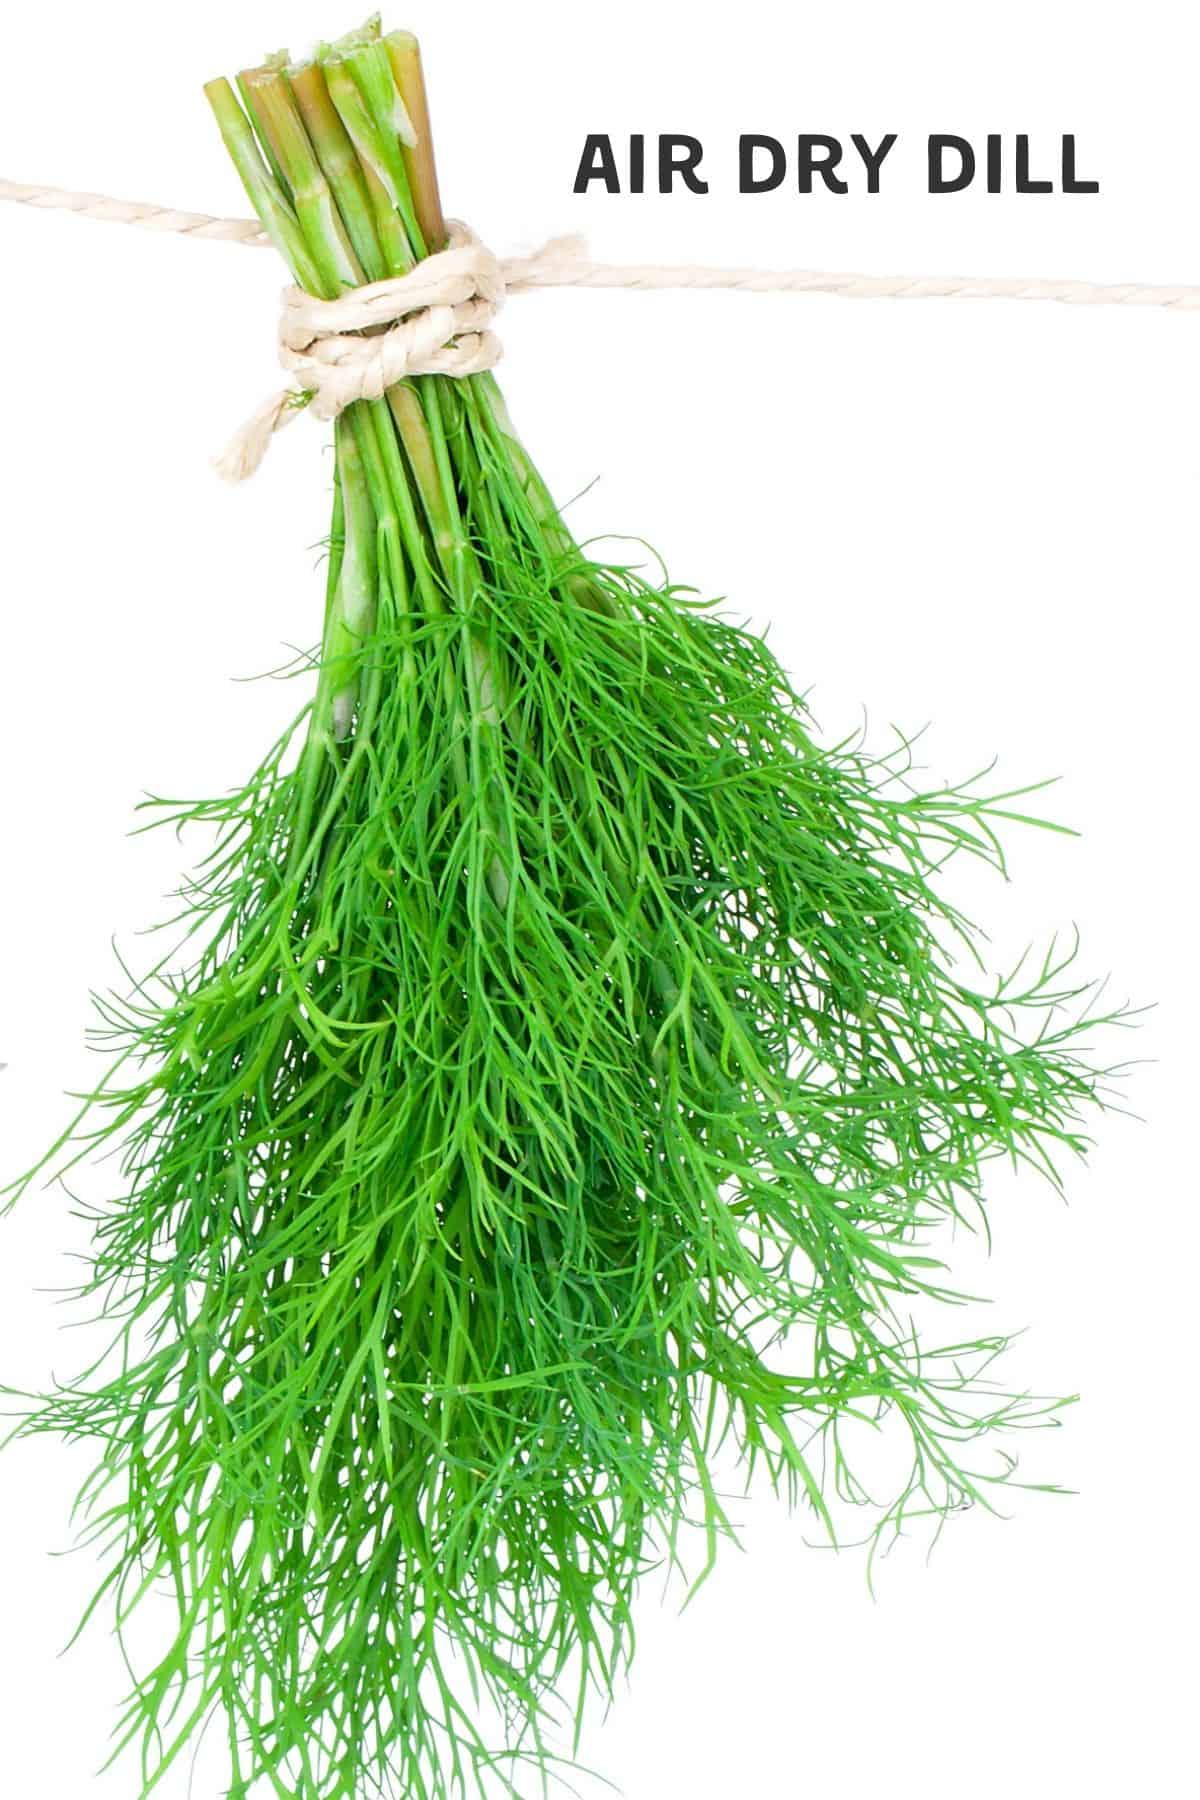 Image of dill hanging upside down against white background, and title.